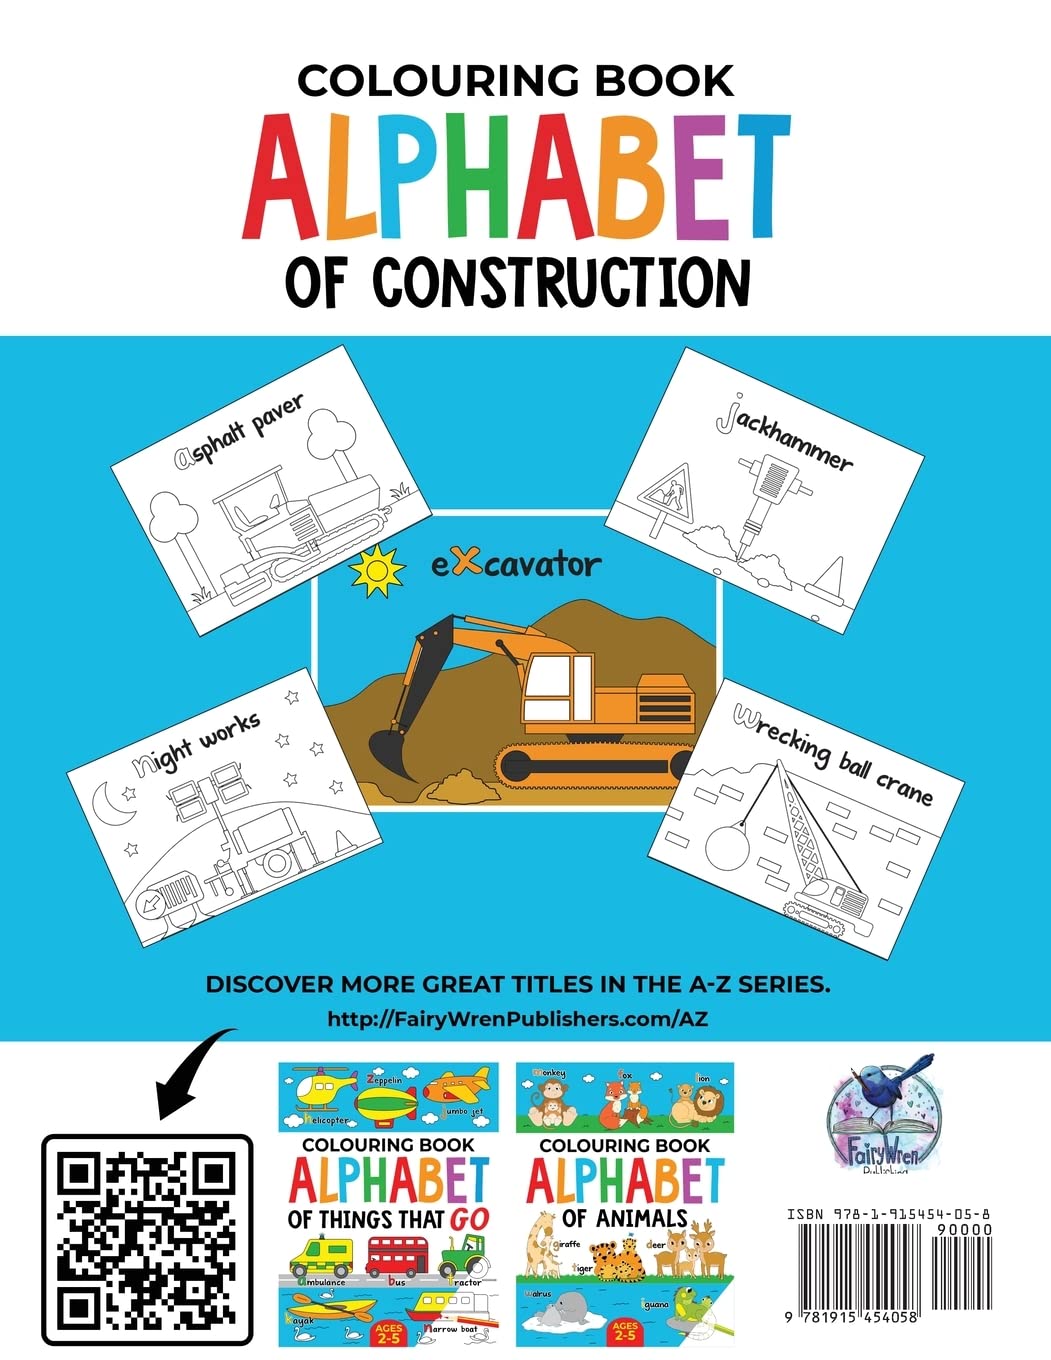 Construction Colouring Book for Children: Alphabet of Construction for Kids: Diggers, Dumpers, Trucks, Tractors and more (Ages 2-5) (Alphabet - Colour and Learn)